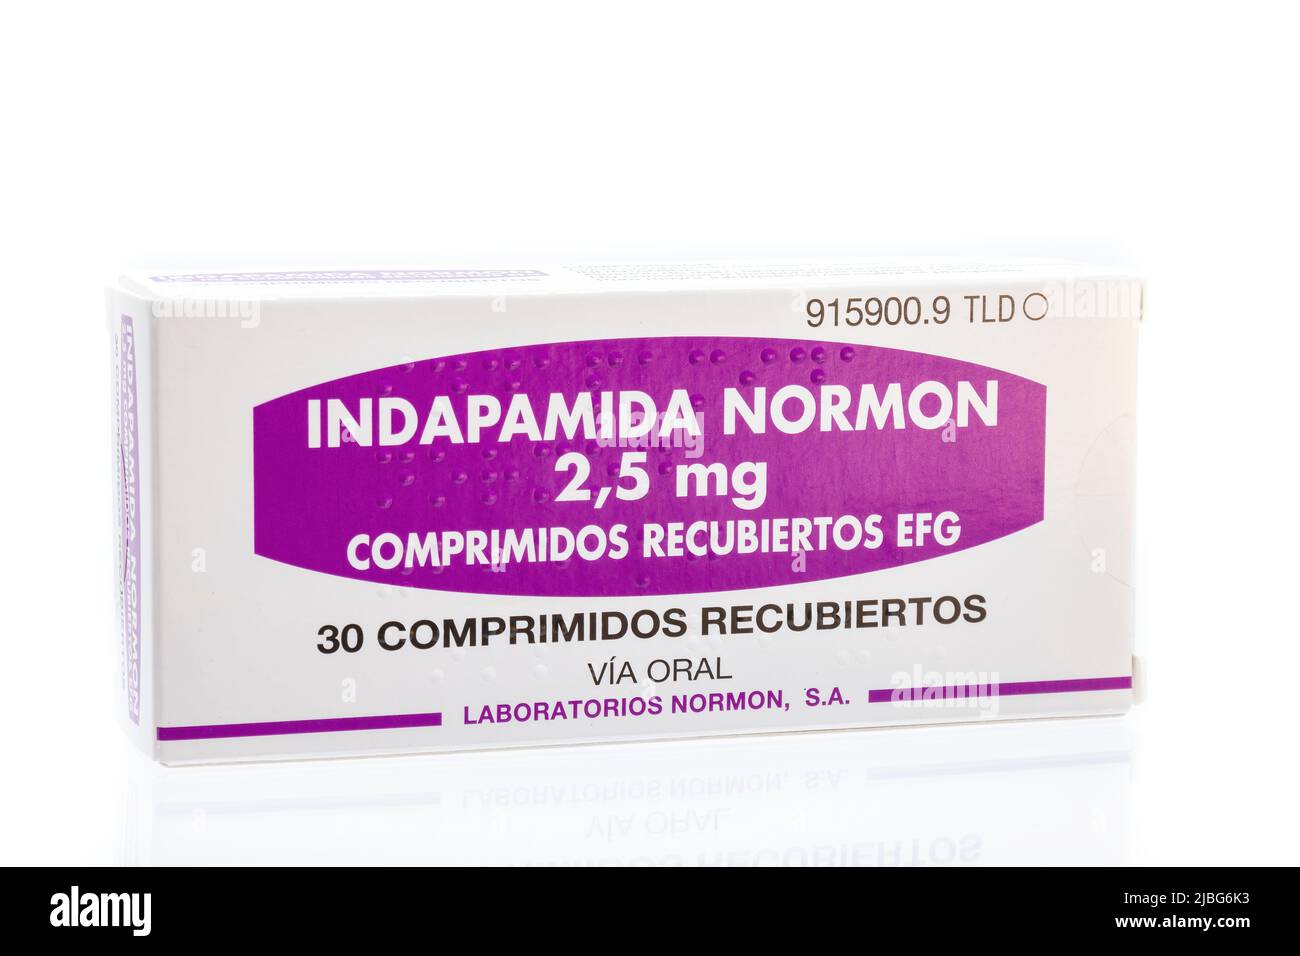 Huelva, Spain-June 4, 2022: Spanish box of Indapamide (Indapamide) from Norman laboratory, is a thiazide-like diuretic drug used in the treatment of h Stock Photo